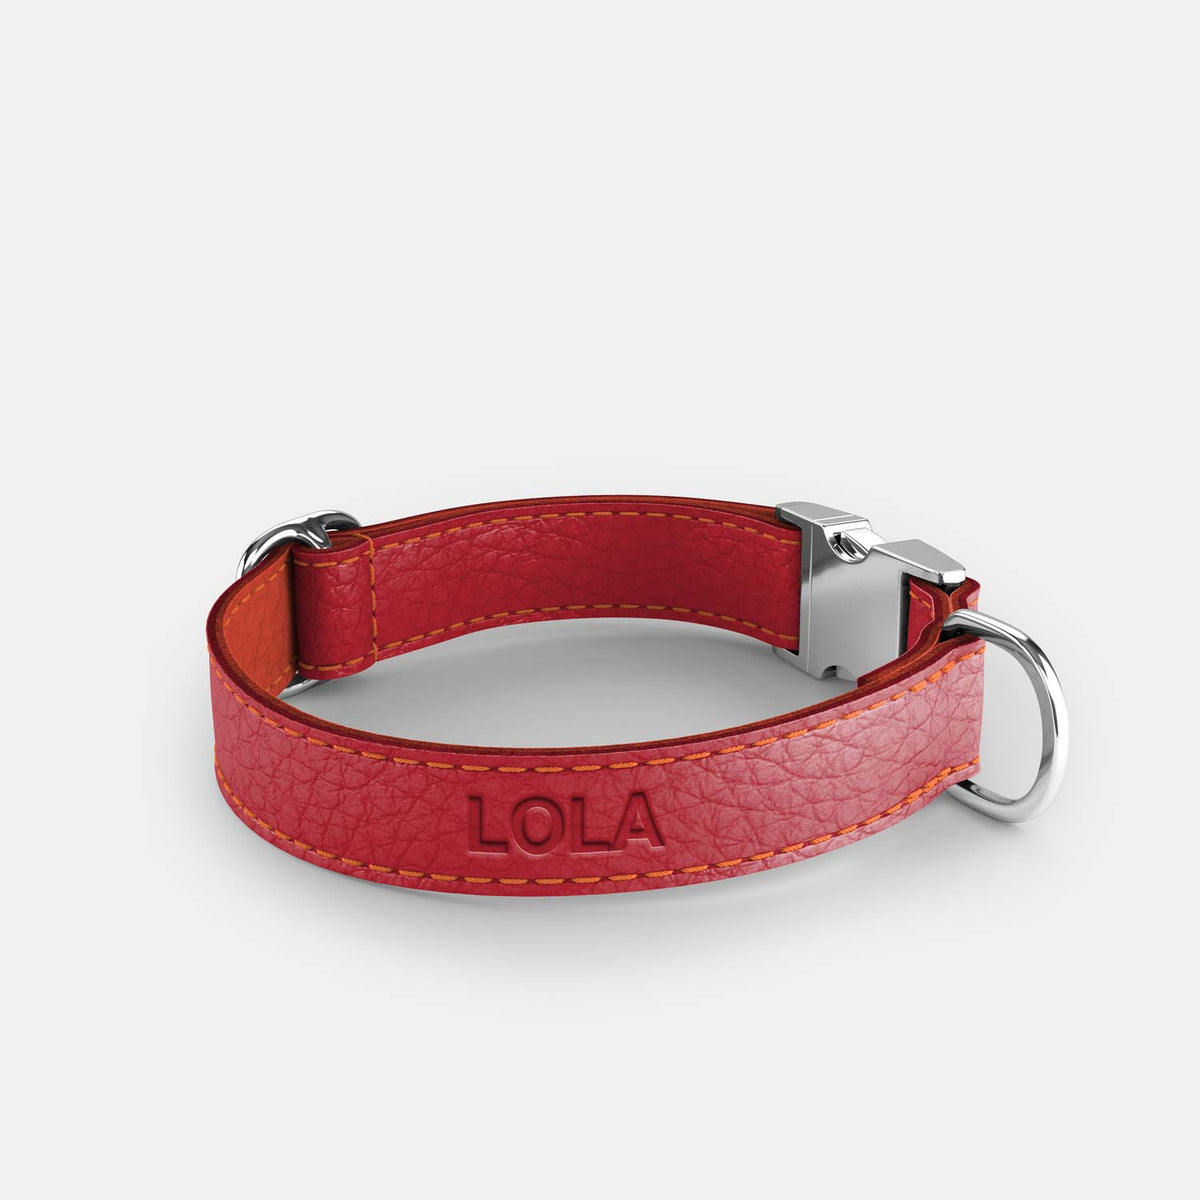 Leather Dog Collar - Red and Coral - RYAN London